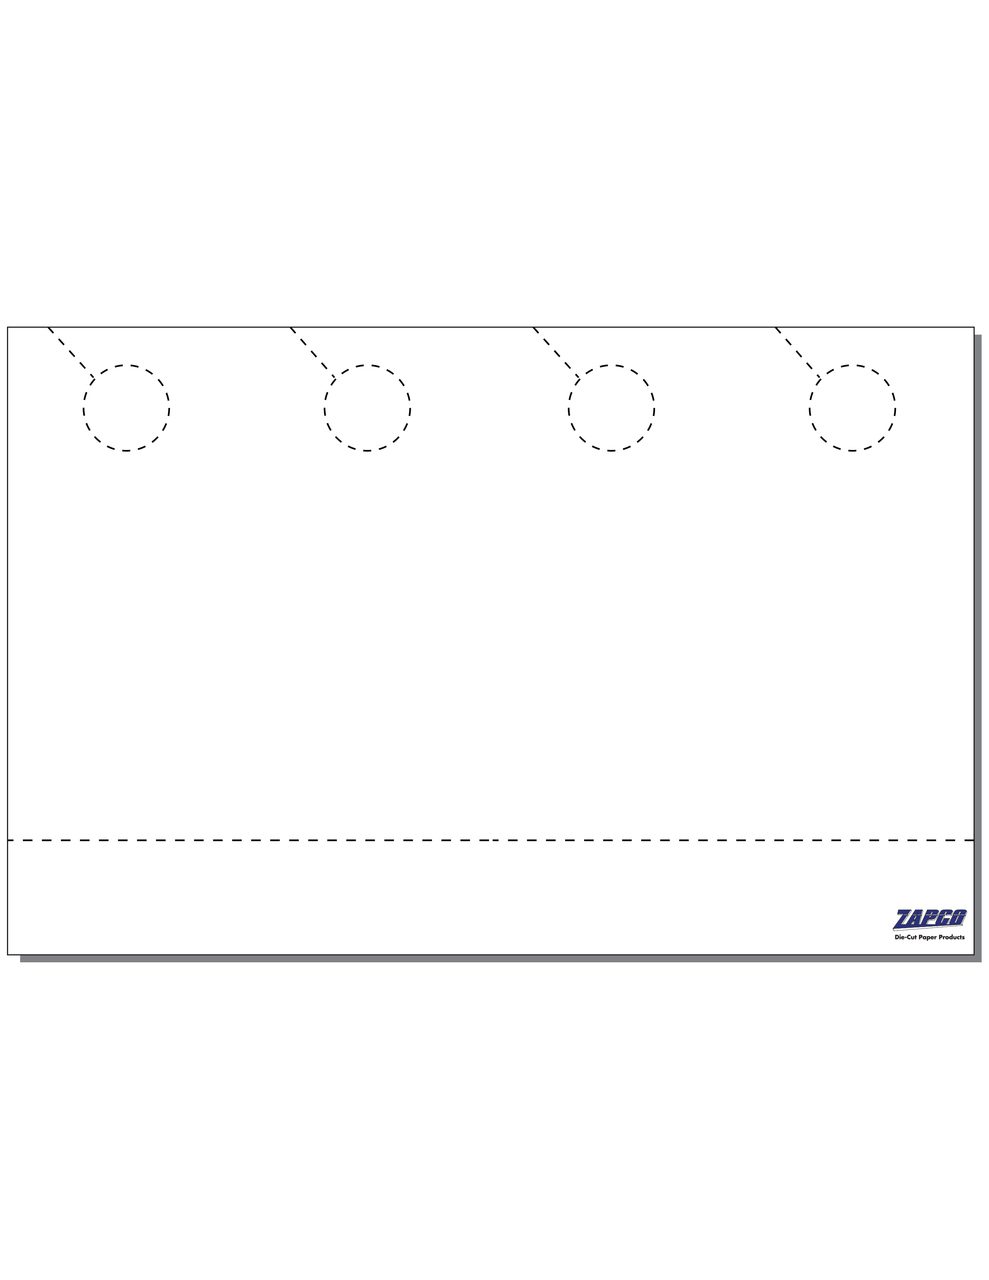 Item 211D: 4-up 4 1/4" x 11" Door Hangers with attached coupon 11" x 17" Sheet(250 Sheets)